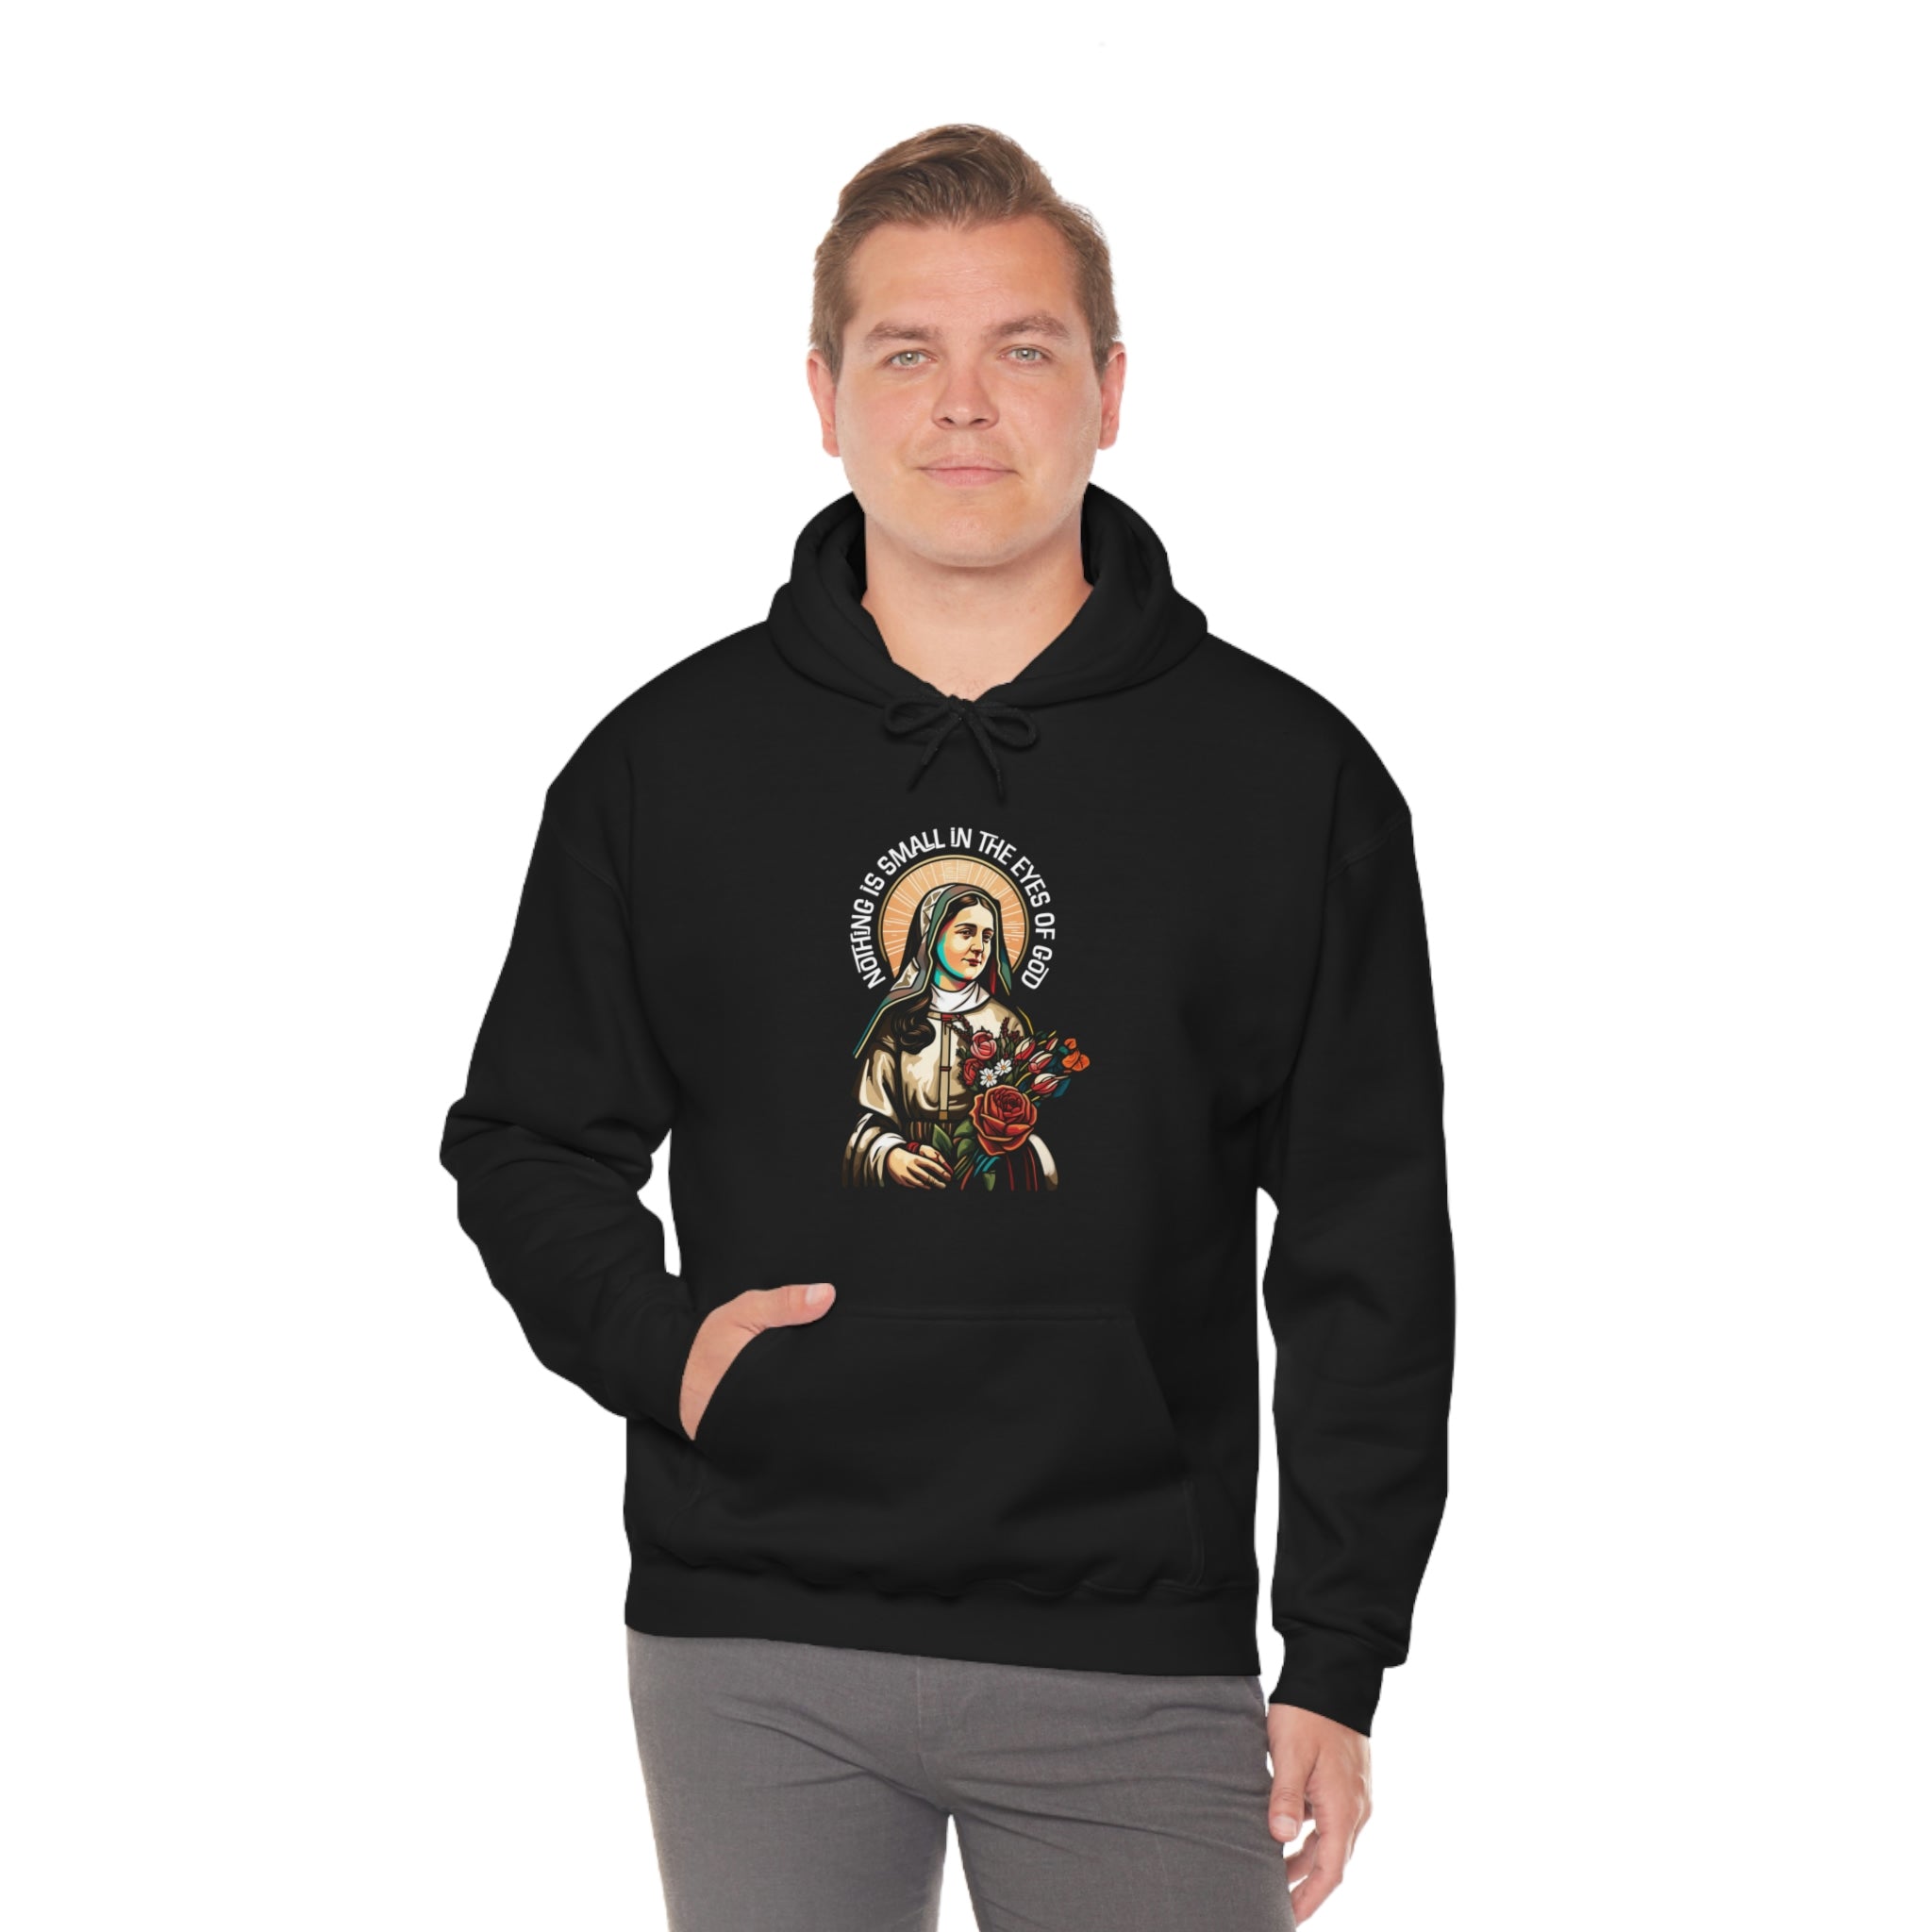 Nothing Is Small Is The Eyes Of God Unisex Hoodie